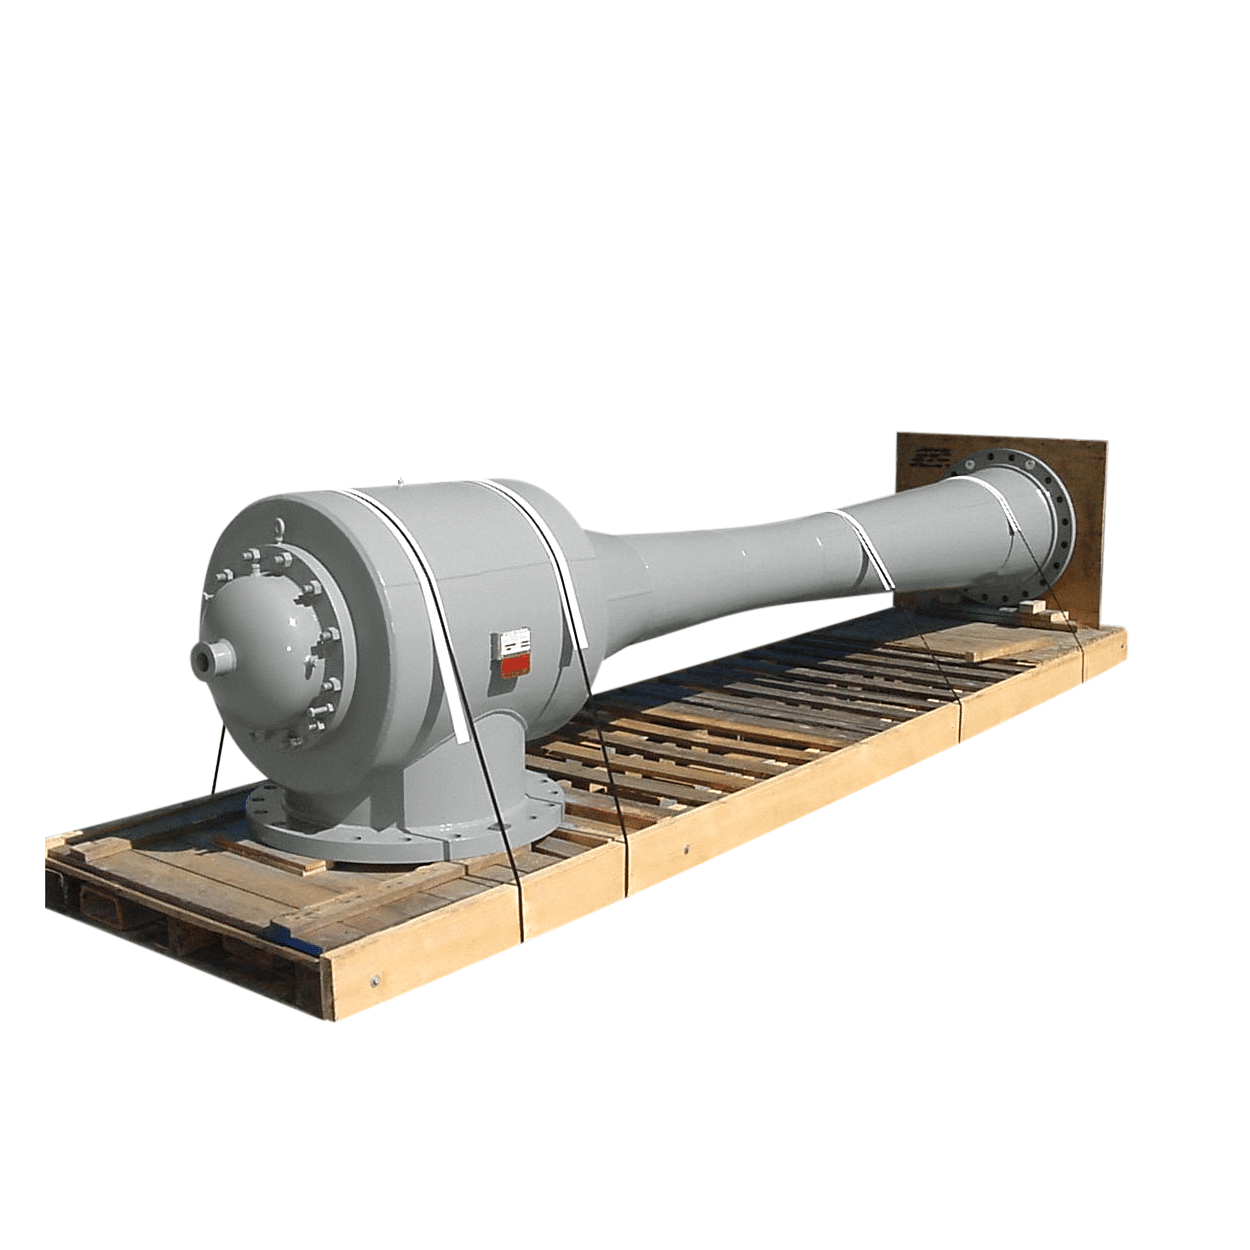 Thermocompressor and Boosters